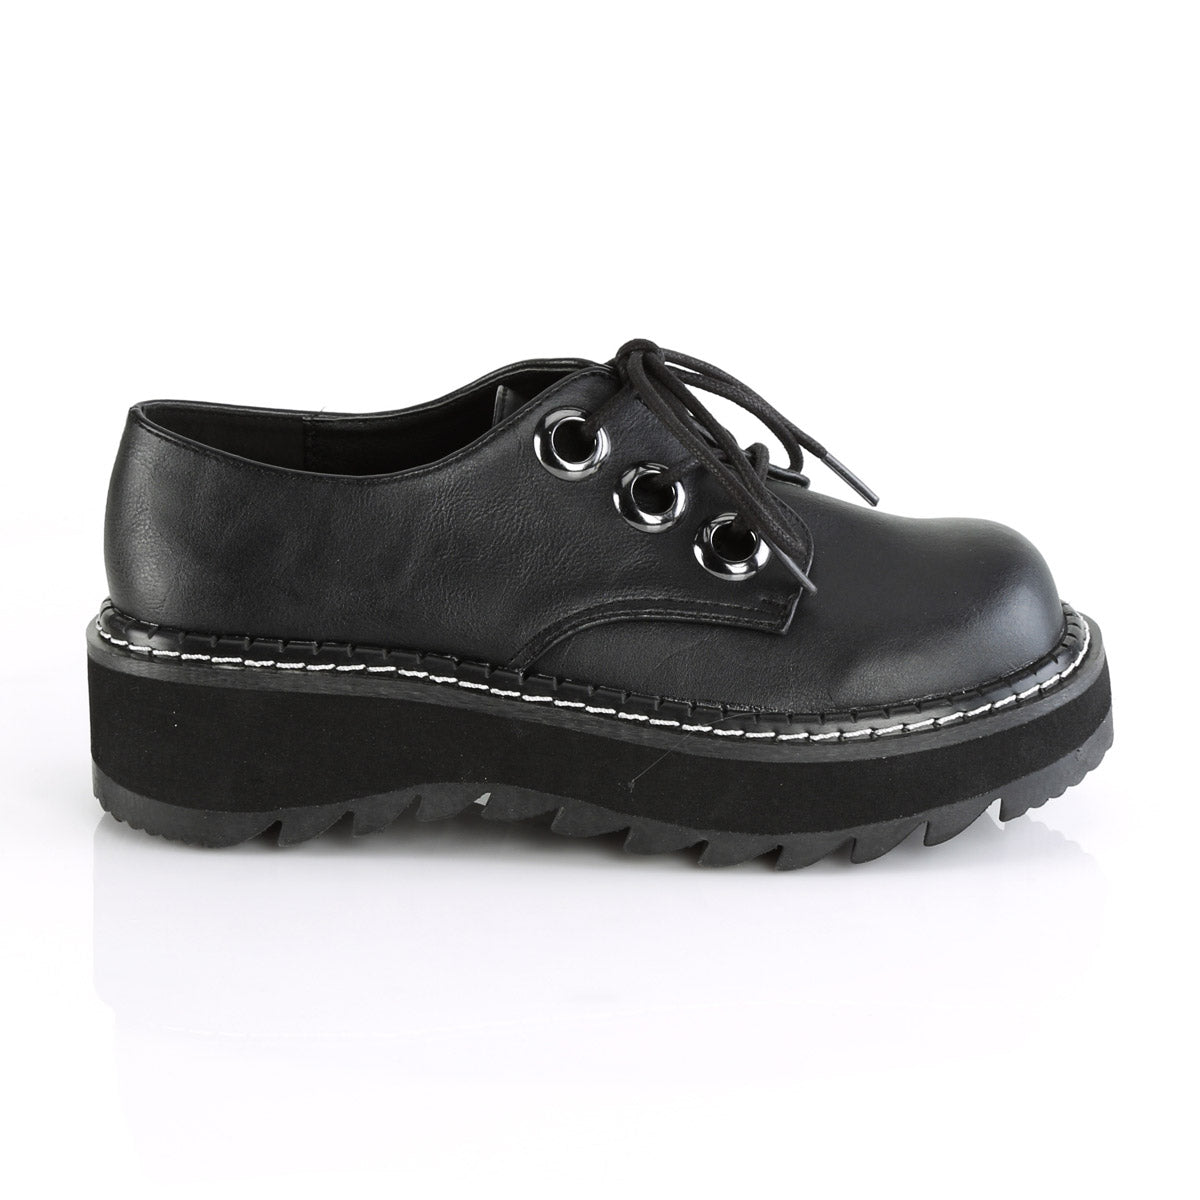 1 1/4" PF 3-Eyelet Lace-Up Oxford Shoe Pleaser Demonia LILITH/99